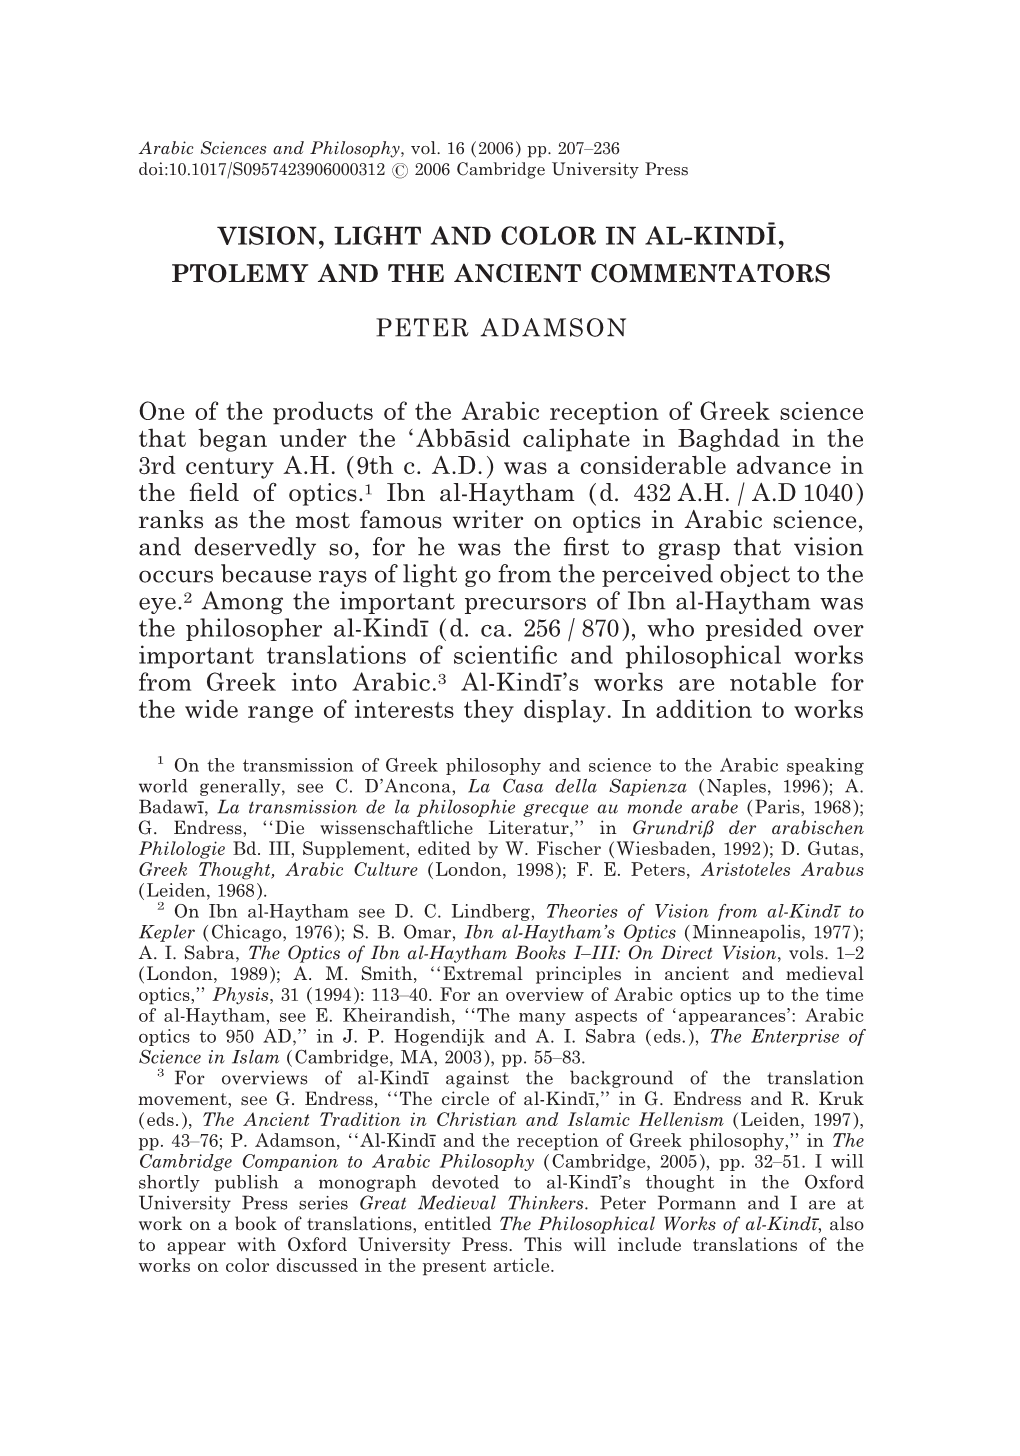 VISION, LIGHT and COLOR in AL-Kindiz, PTOLEMY and the ANCIENT COMMENTATORS